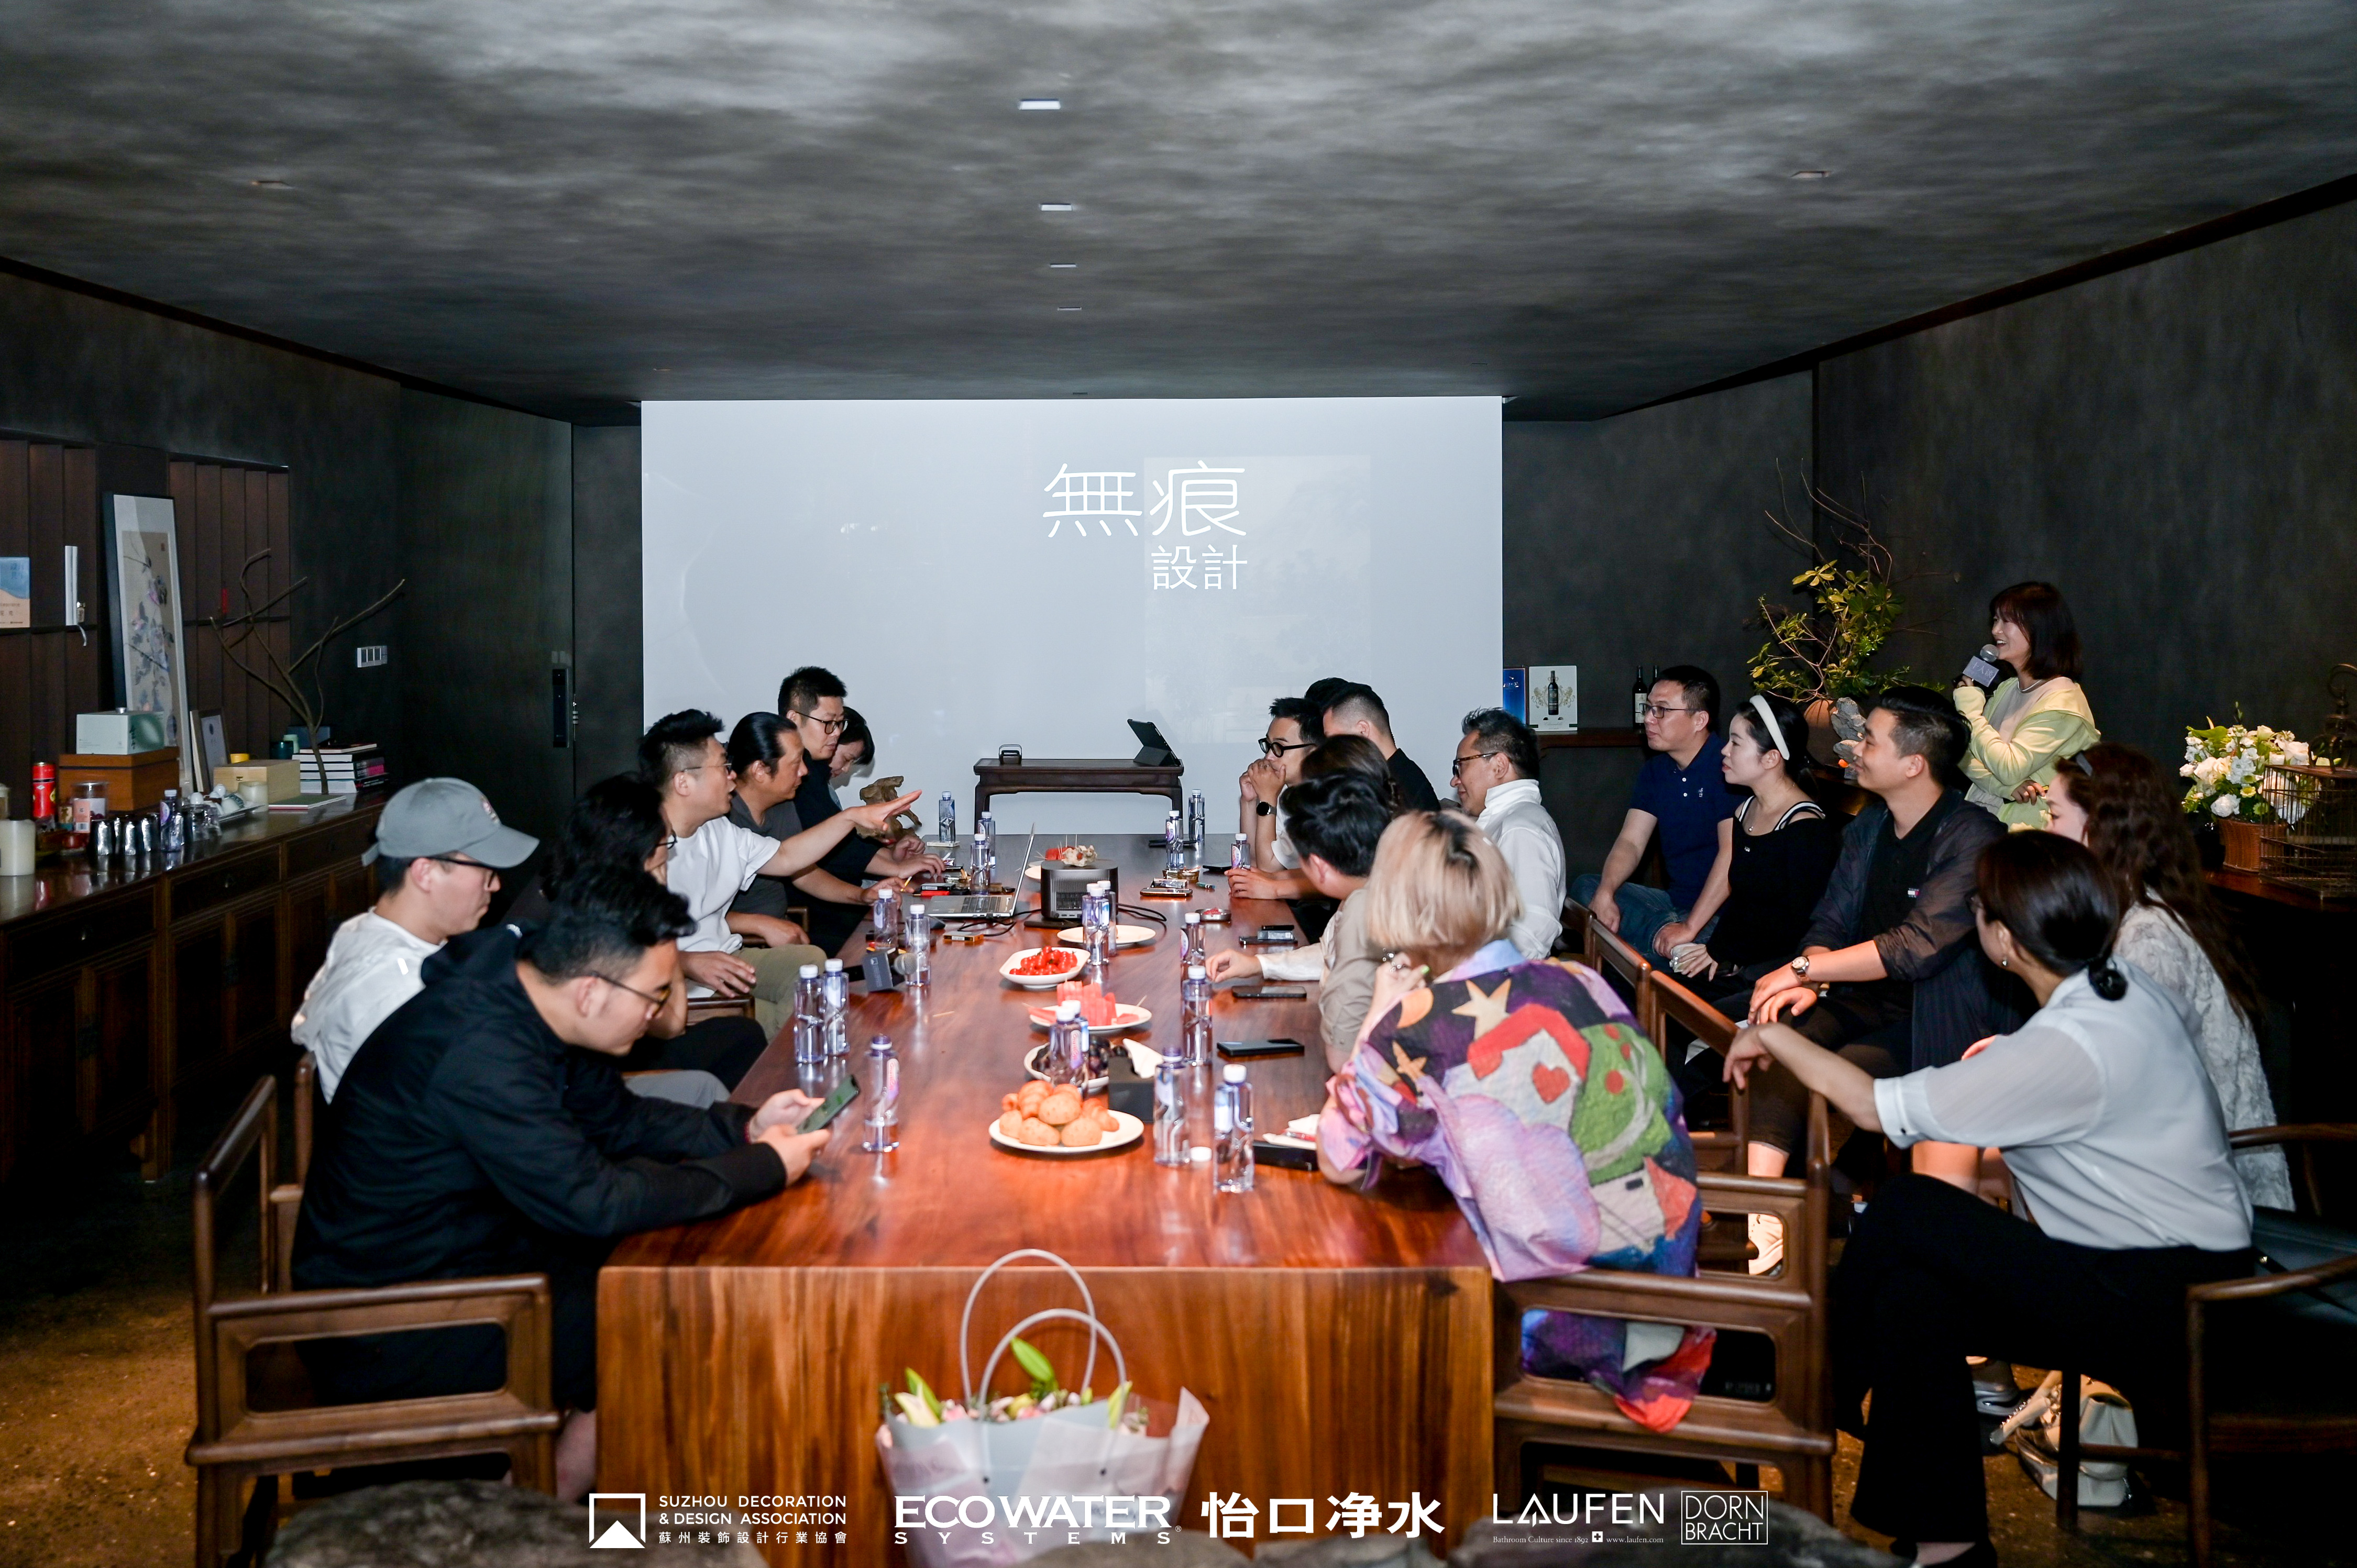  On June 6, the first phase of "Ten People Talk" design research was successfully completed. "Ten people talk" series of design research activities are sponsored by Suzhou Decoration Design Industry Association, and EDG Two Bars Media provides media support, aiming to enter the design works, through the body of space